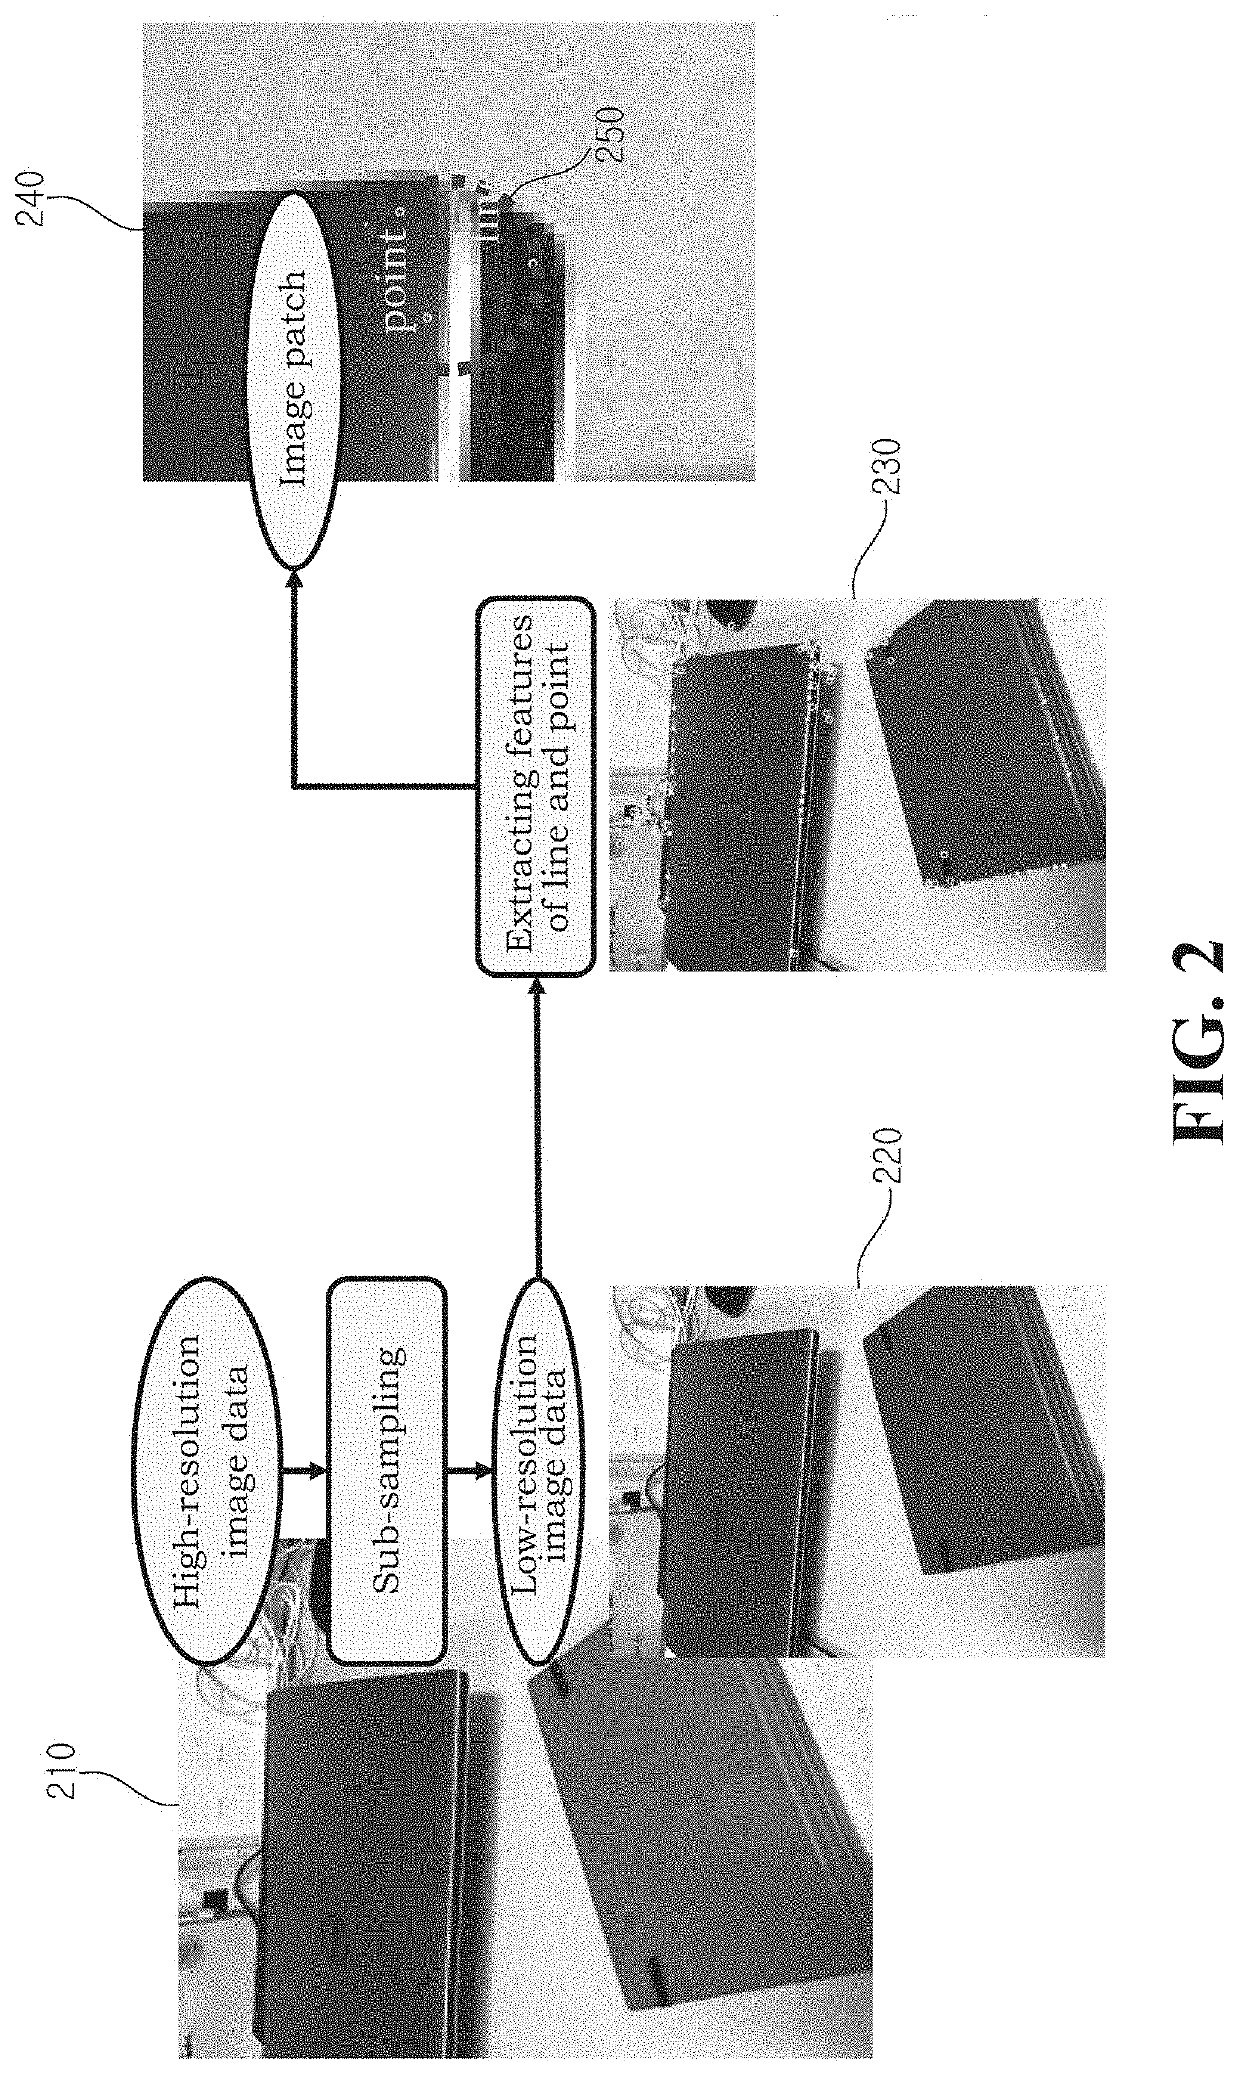 Localization method and system for augmented reality in mobile devices